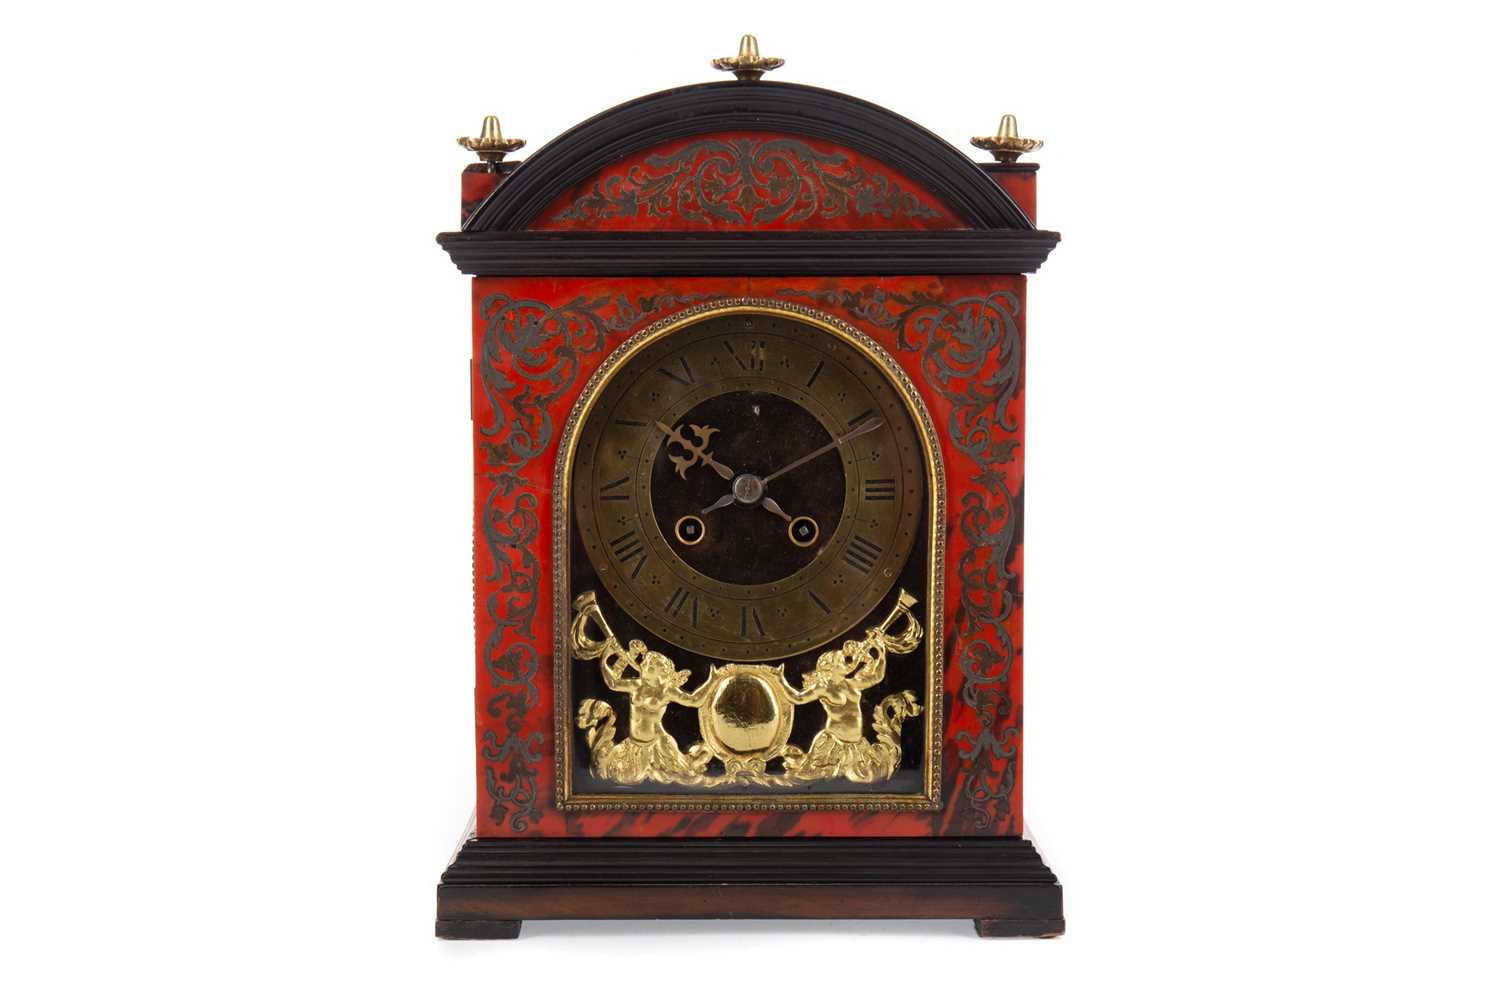 Lot 1190 - A LATE 19TH CENTURY FRENCH BOULLE MANTEL CLOCK